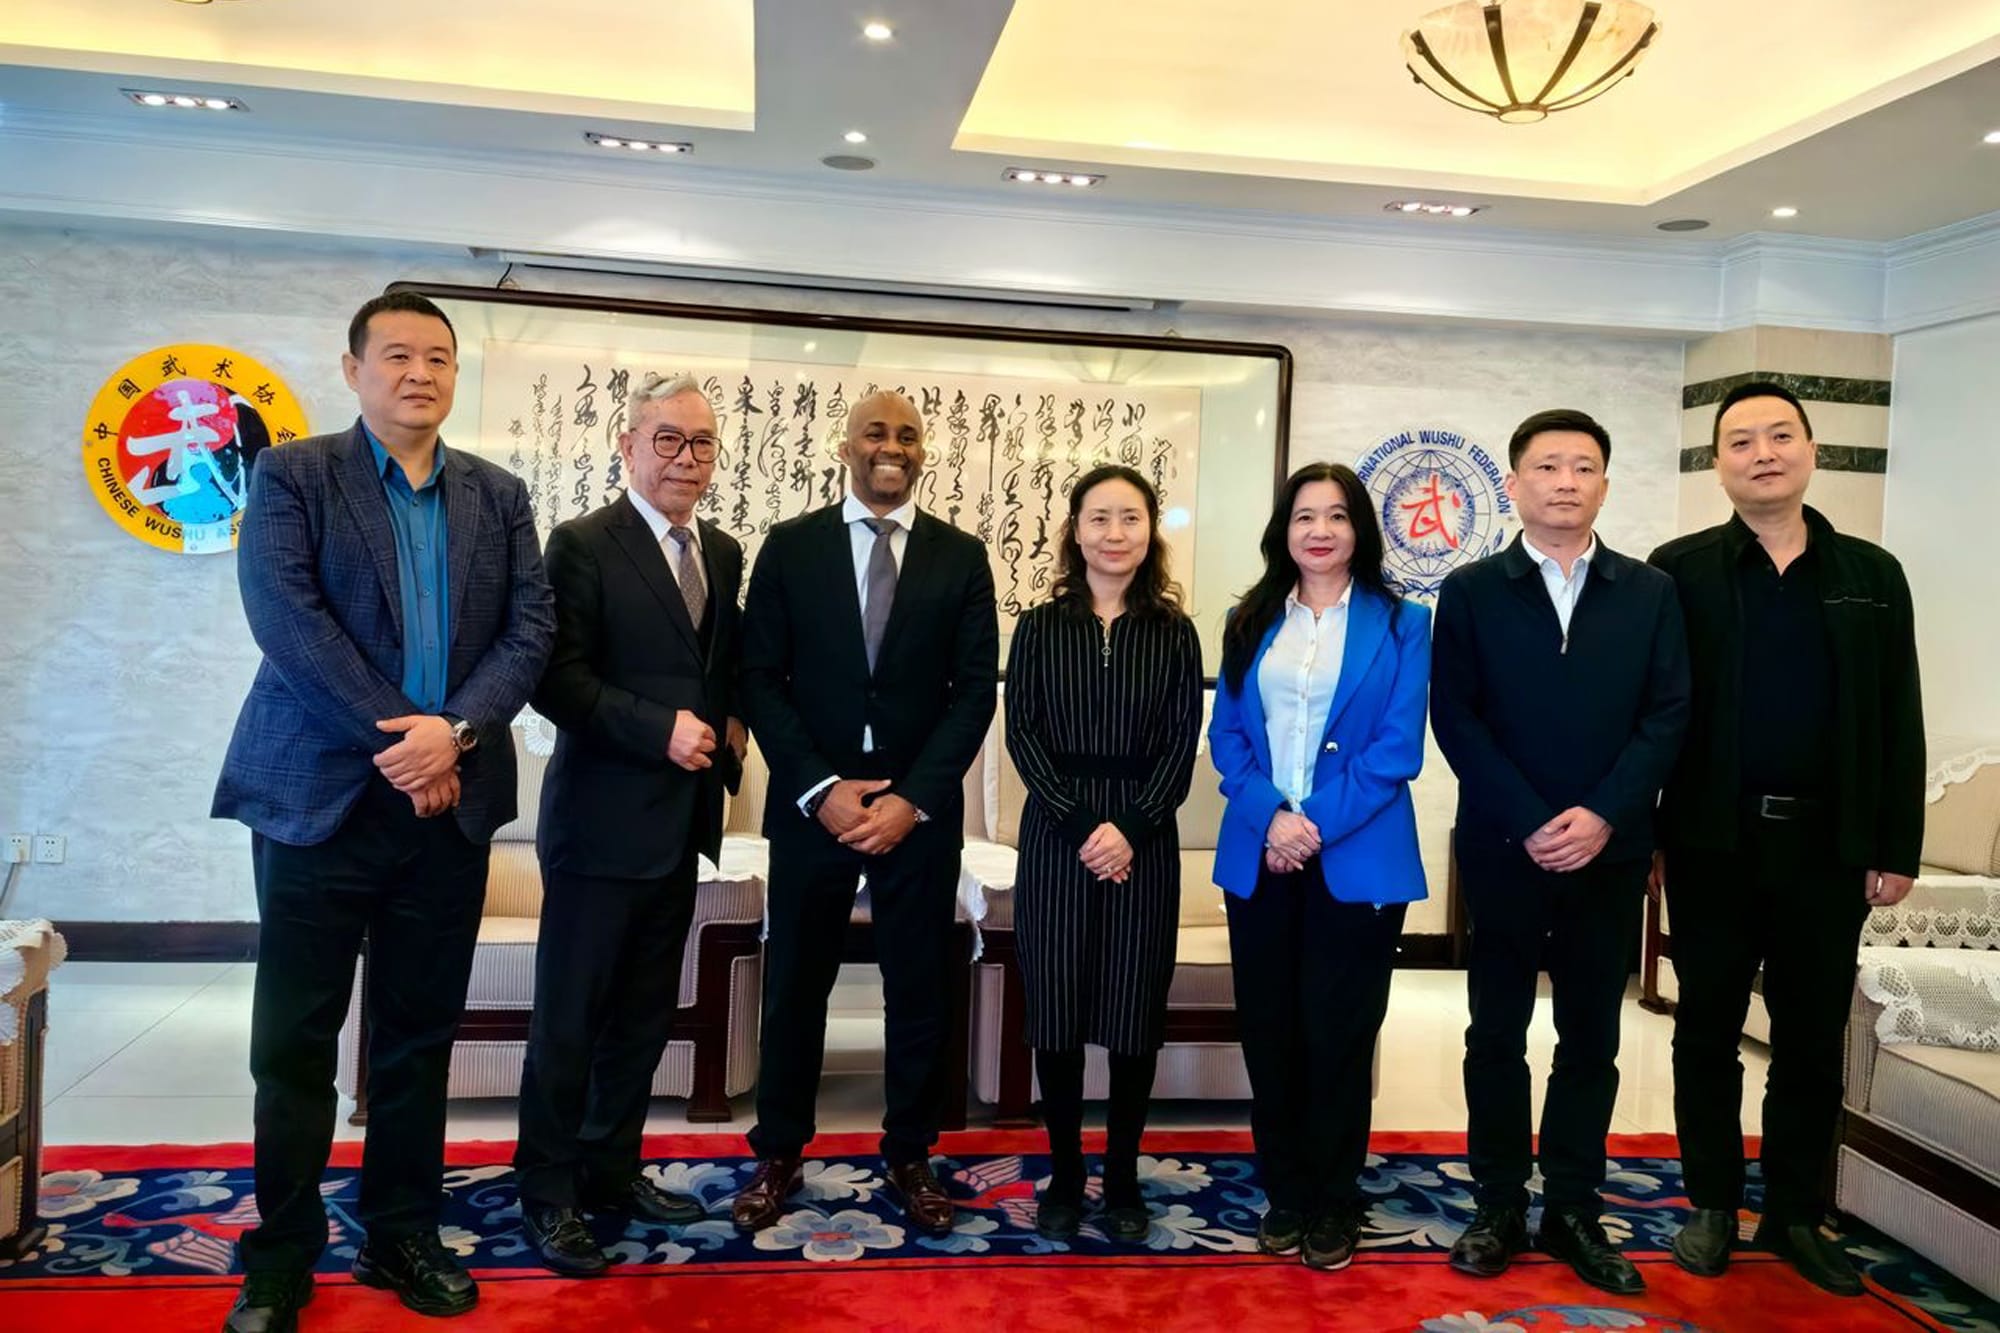 IMMAF president Kerrith Brown’s official visit to China to discuss MMA development in the country